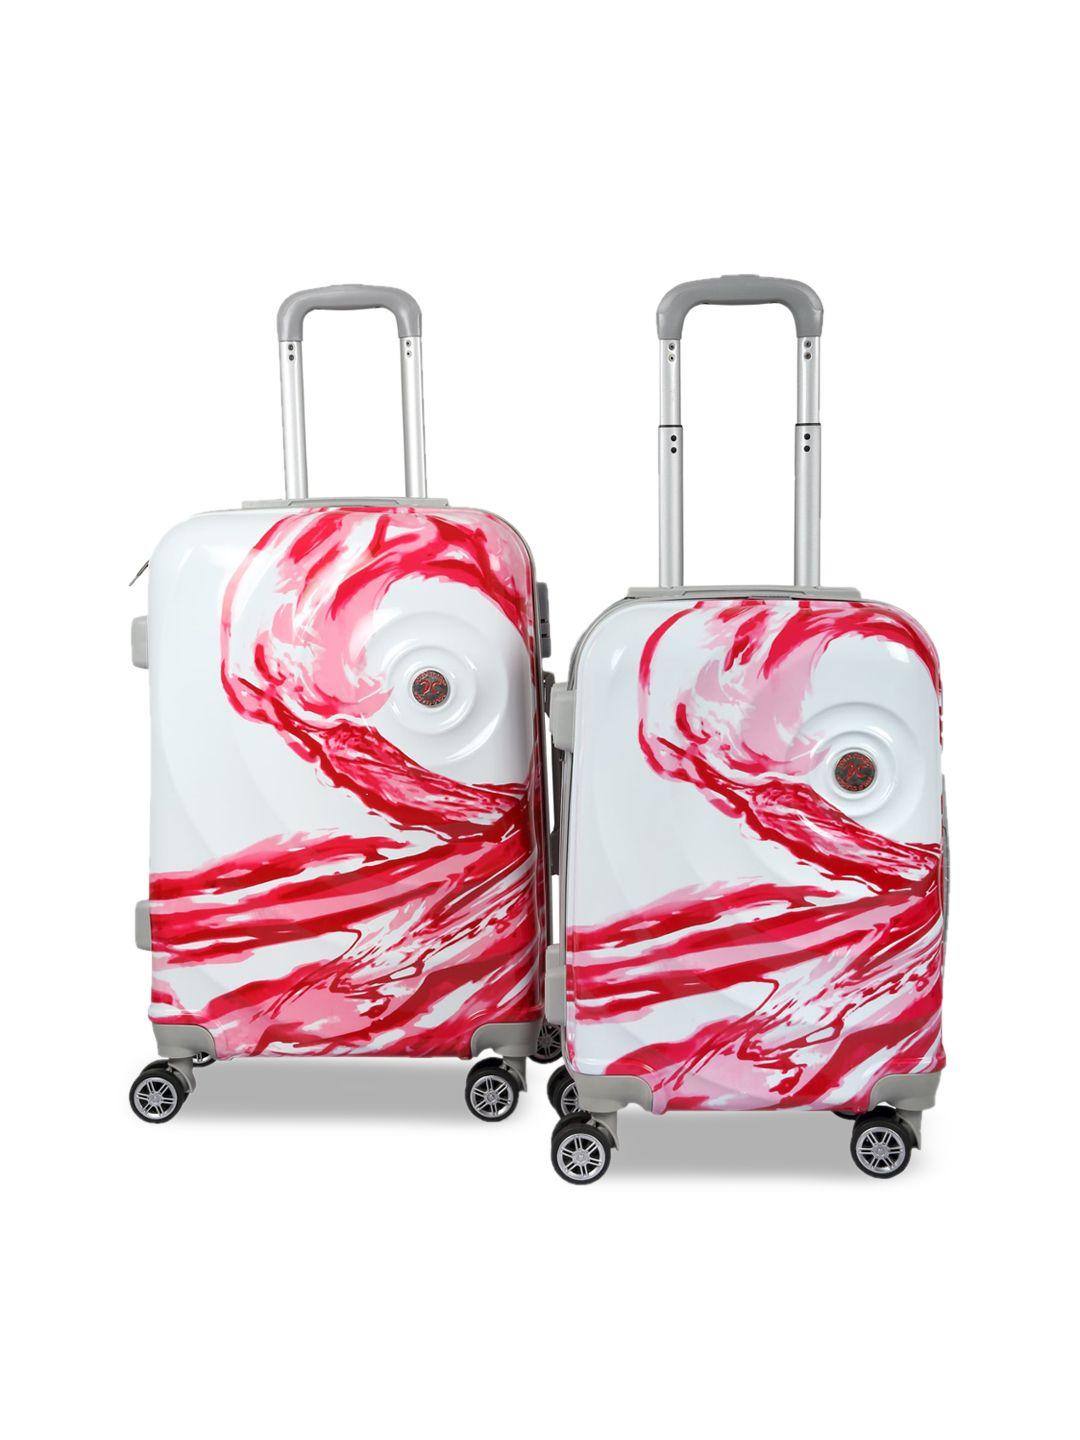 polo class red & white set of 2 printed hard case 360 degree rotation trolley suitcases